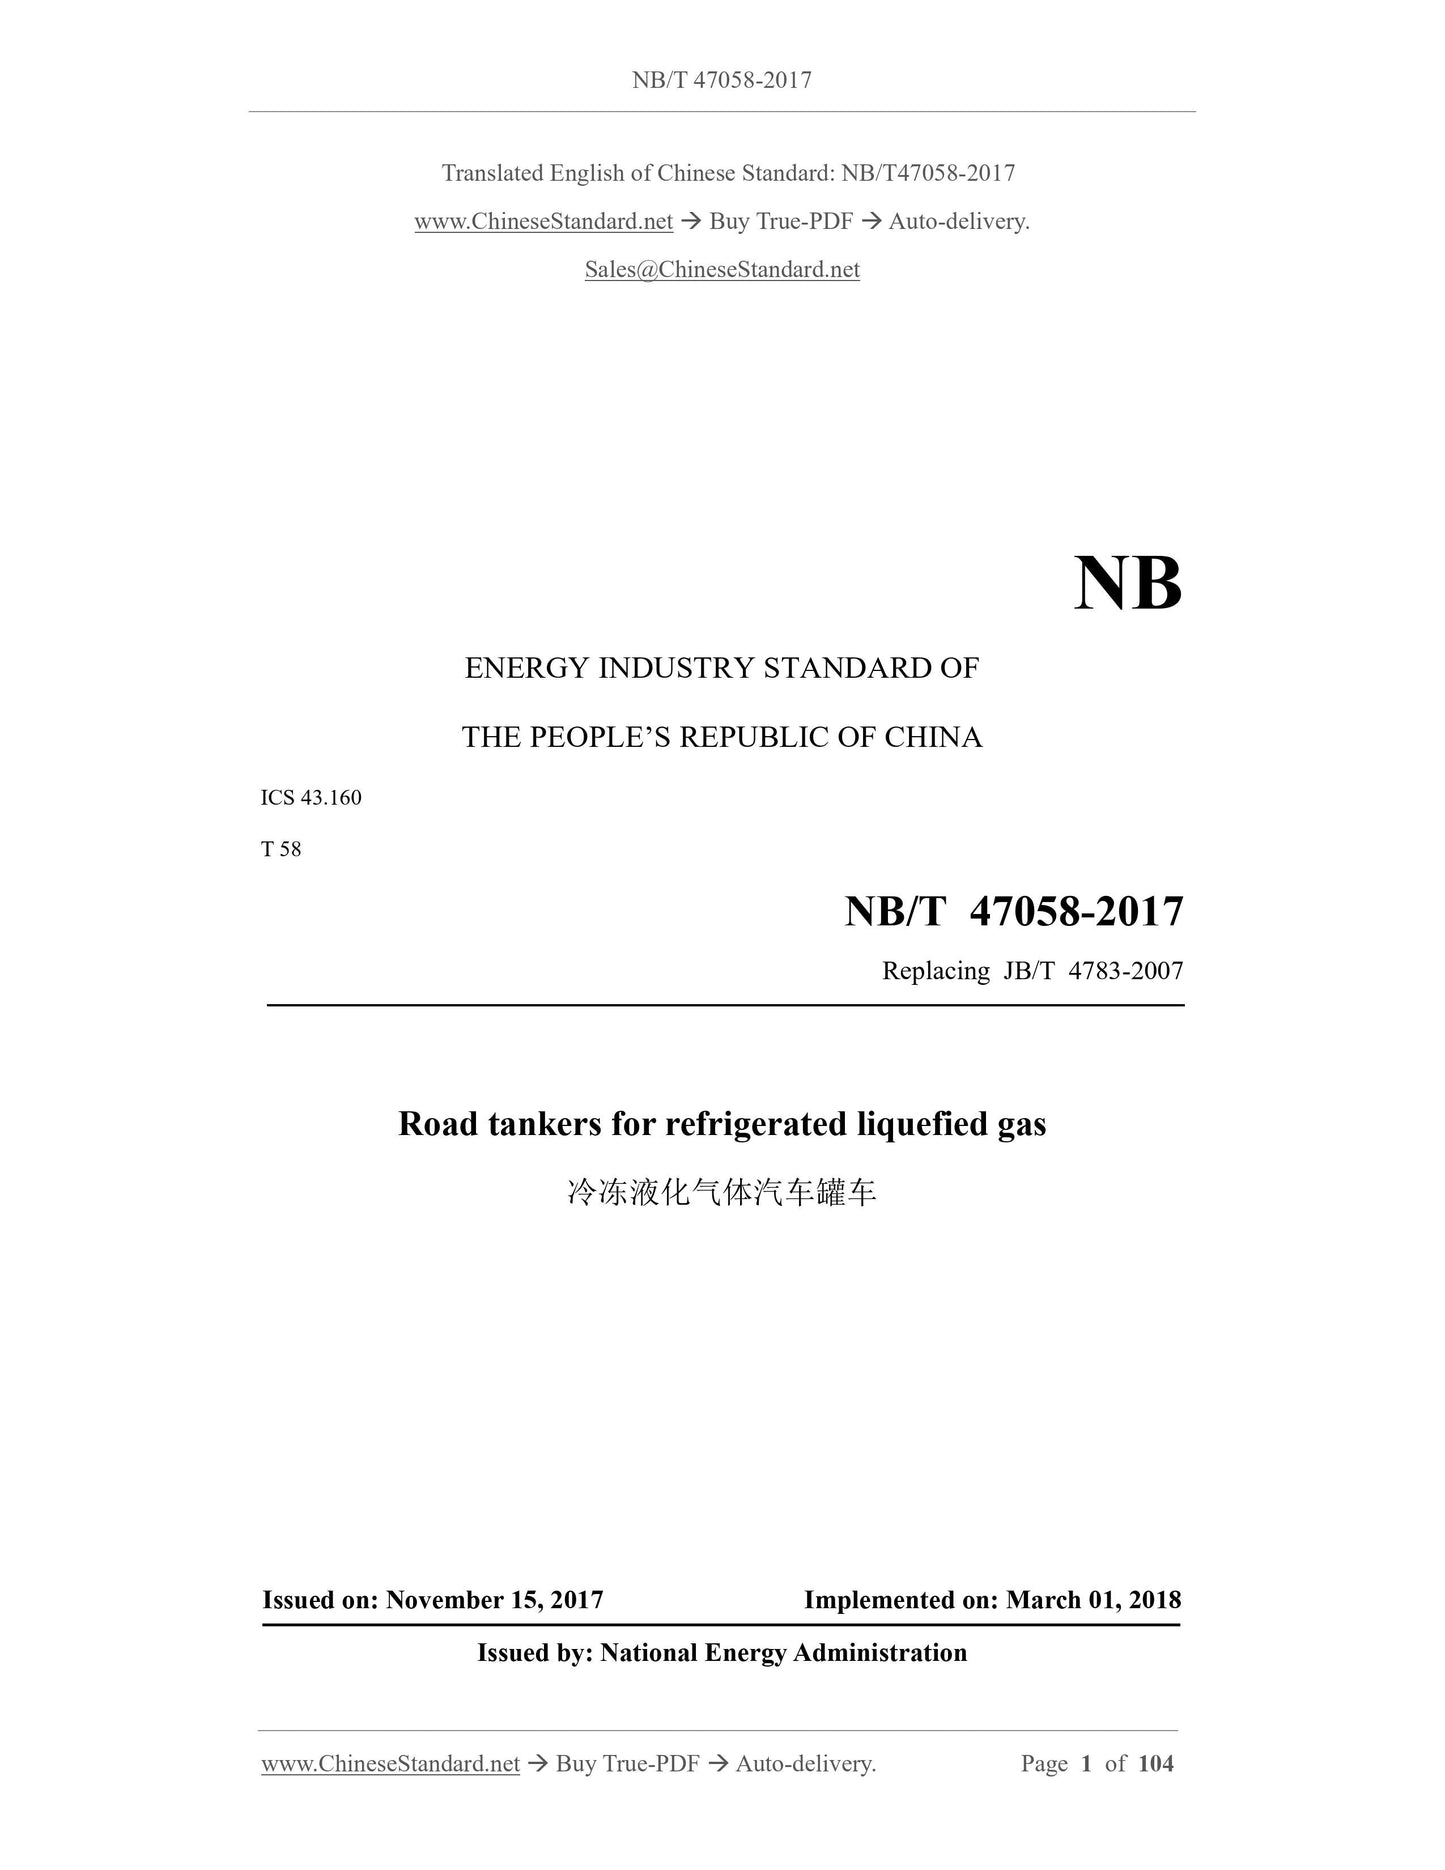 NB/T 47058-2017 Page 1